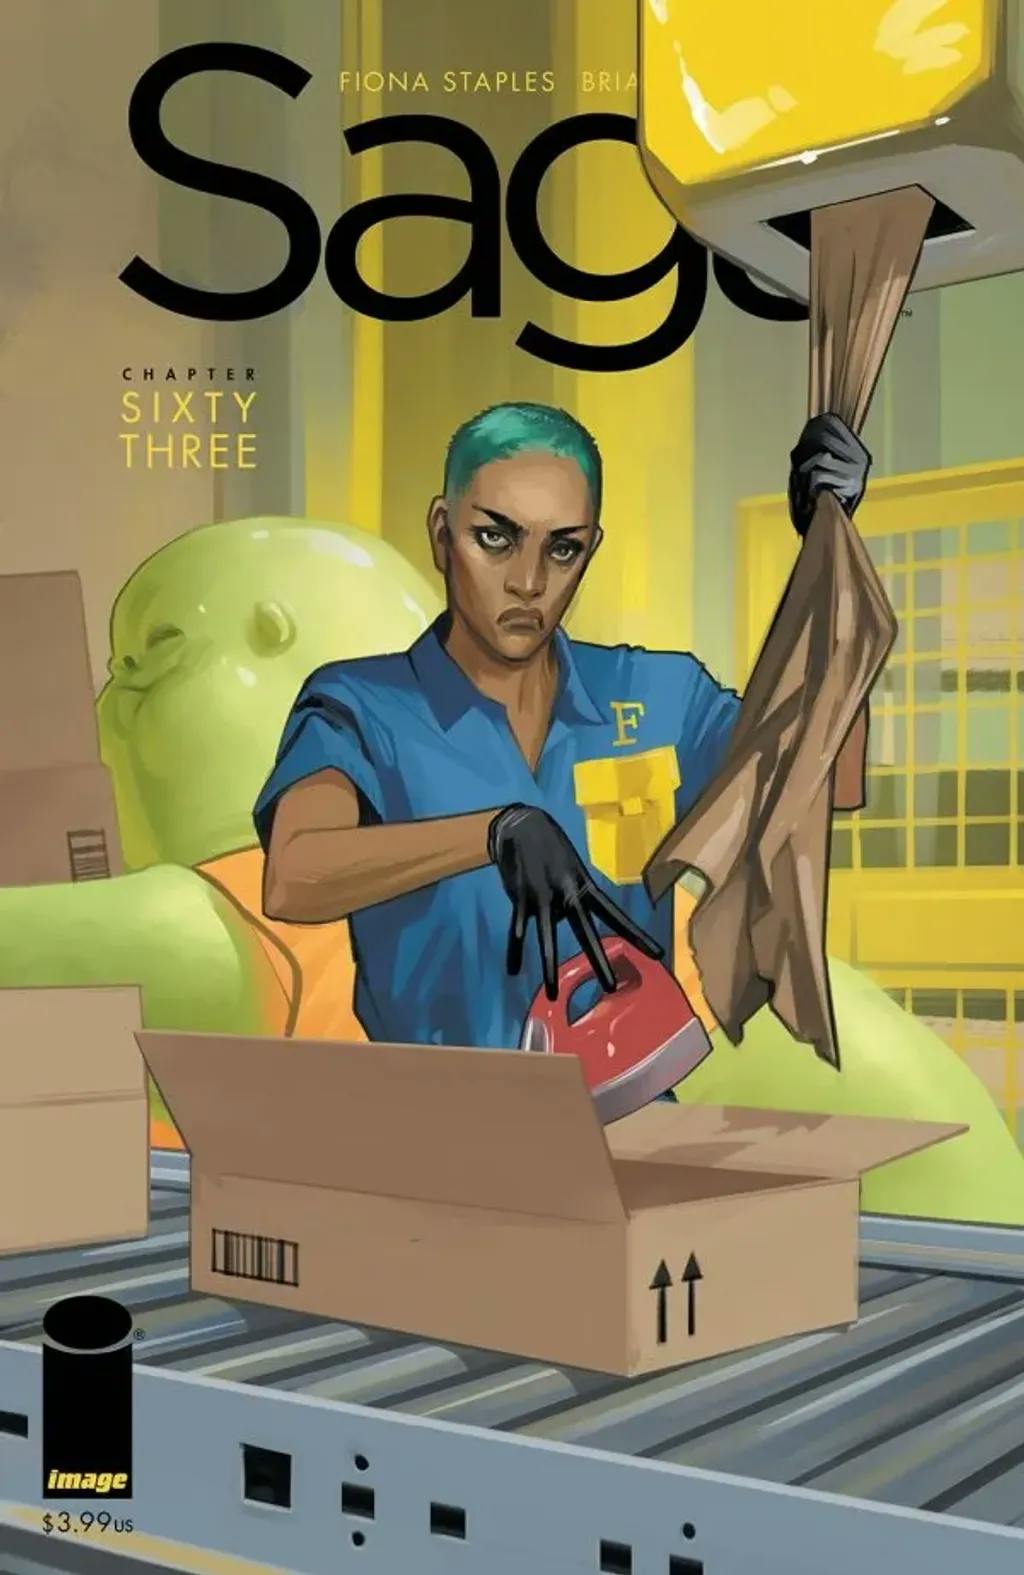 Saga #63 By Brian K. Vaughan and Fiona Staples